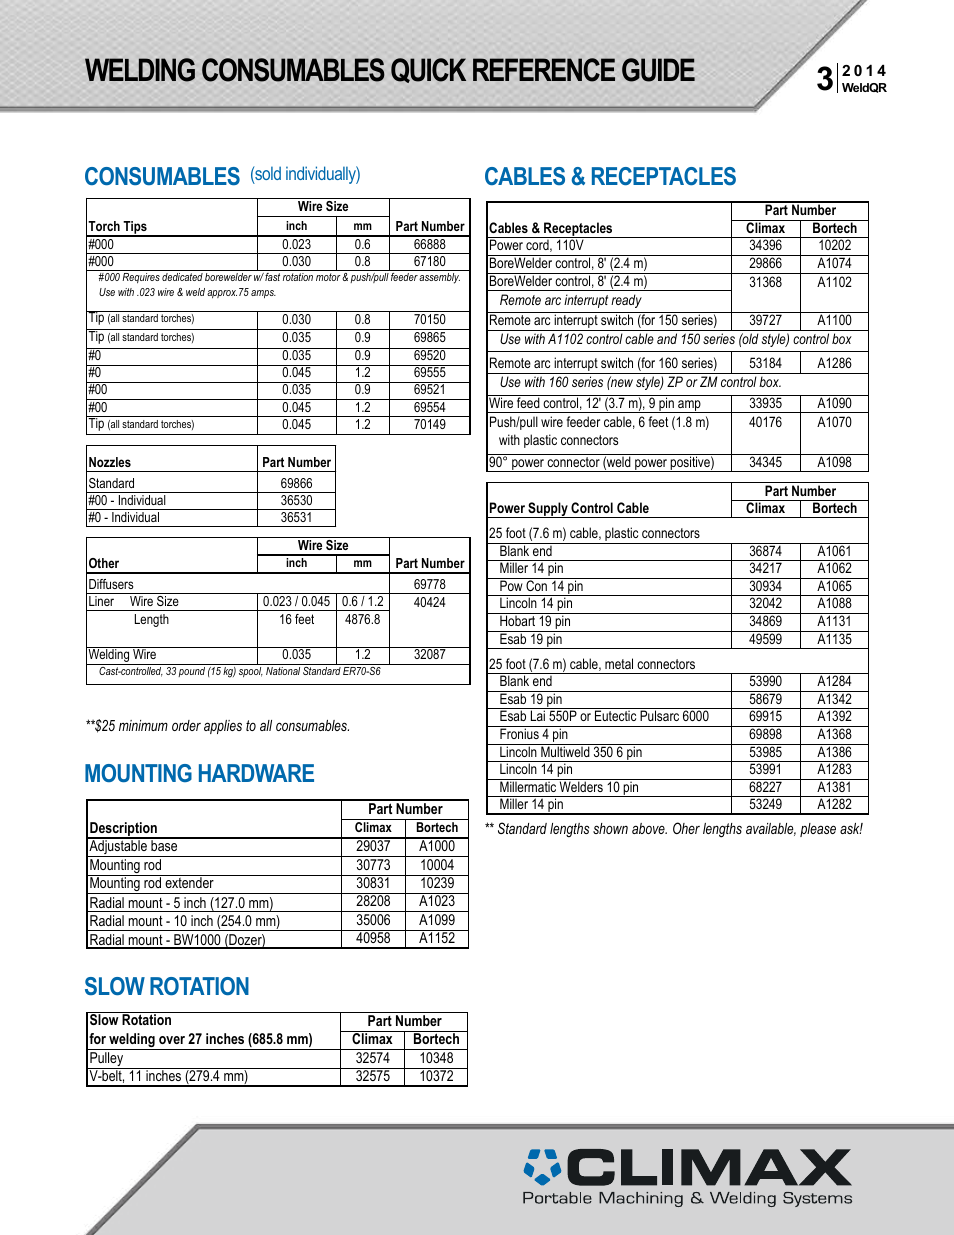 BW3000 WELDING CONSUMABLES QUICK REFERENCE GUIDE